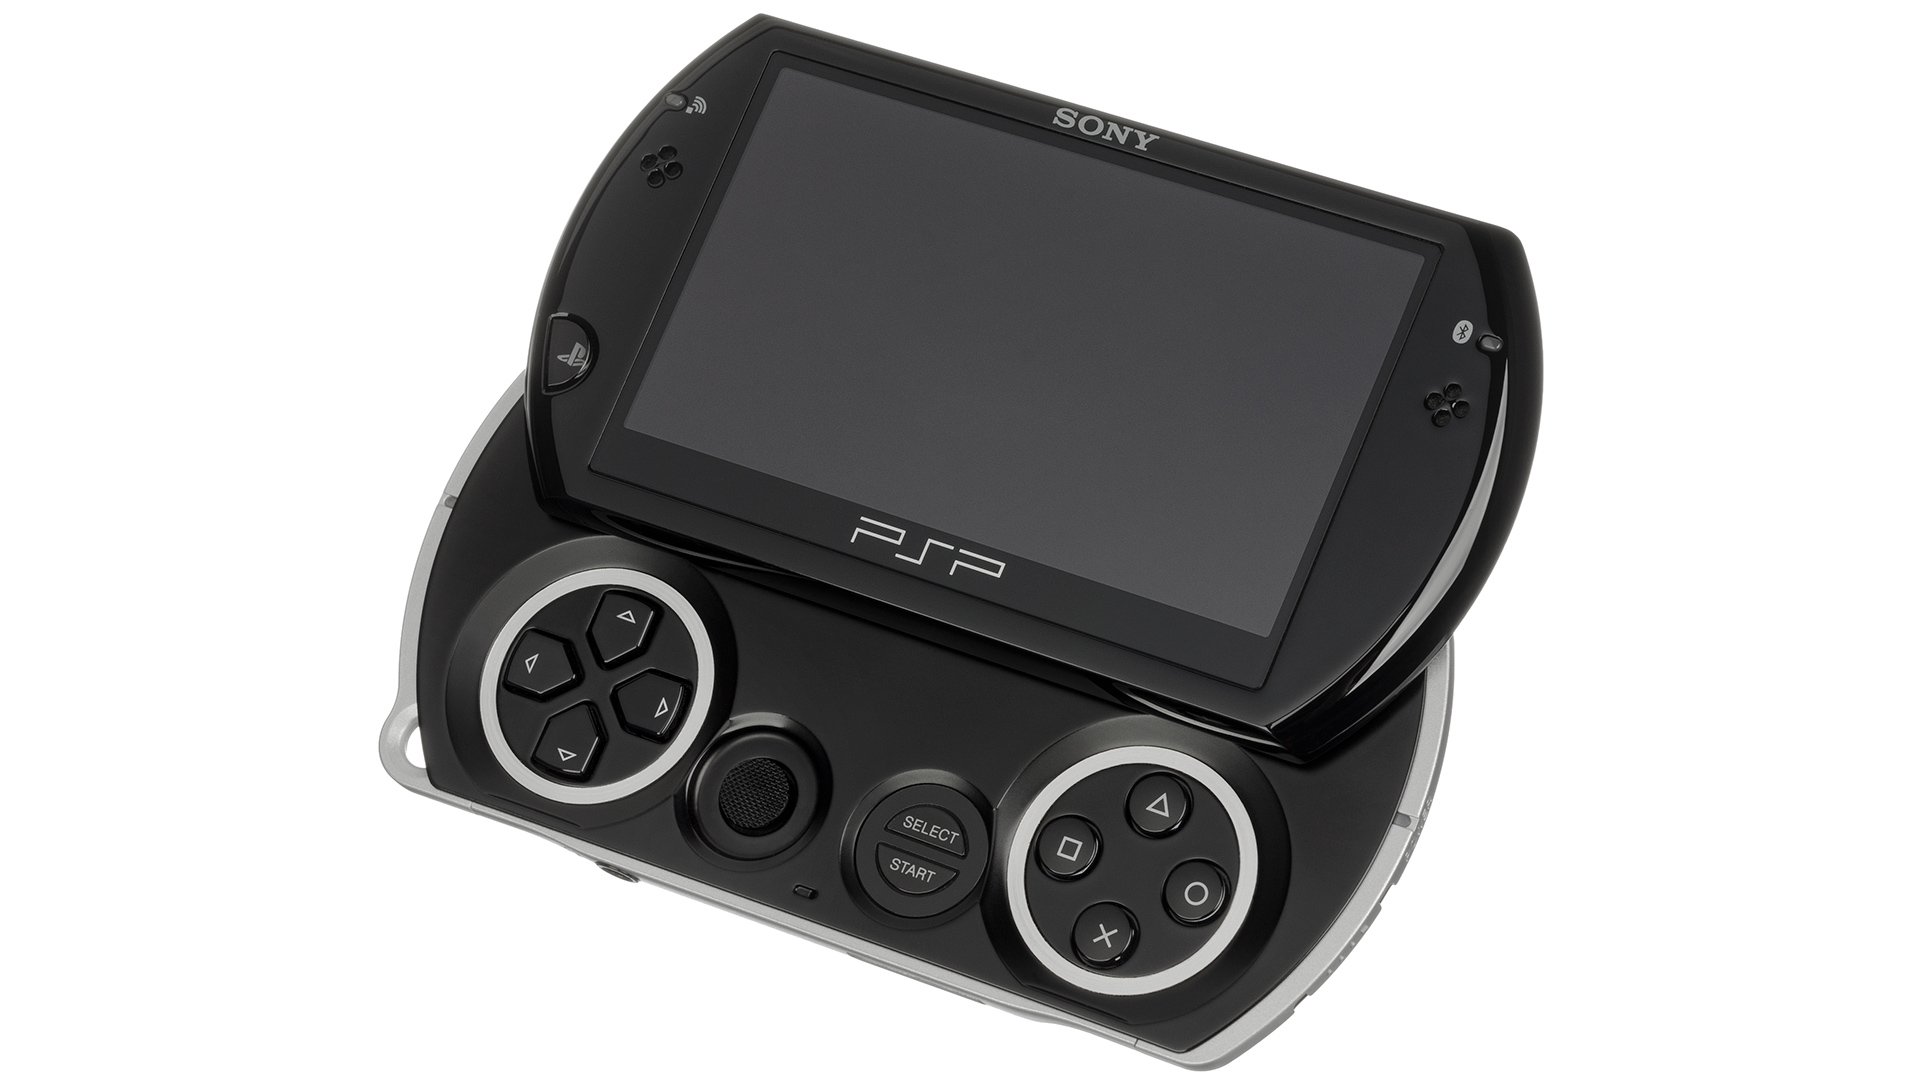 The 35 Best PSP Games of All Time